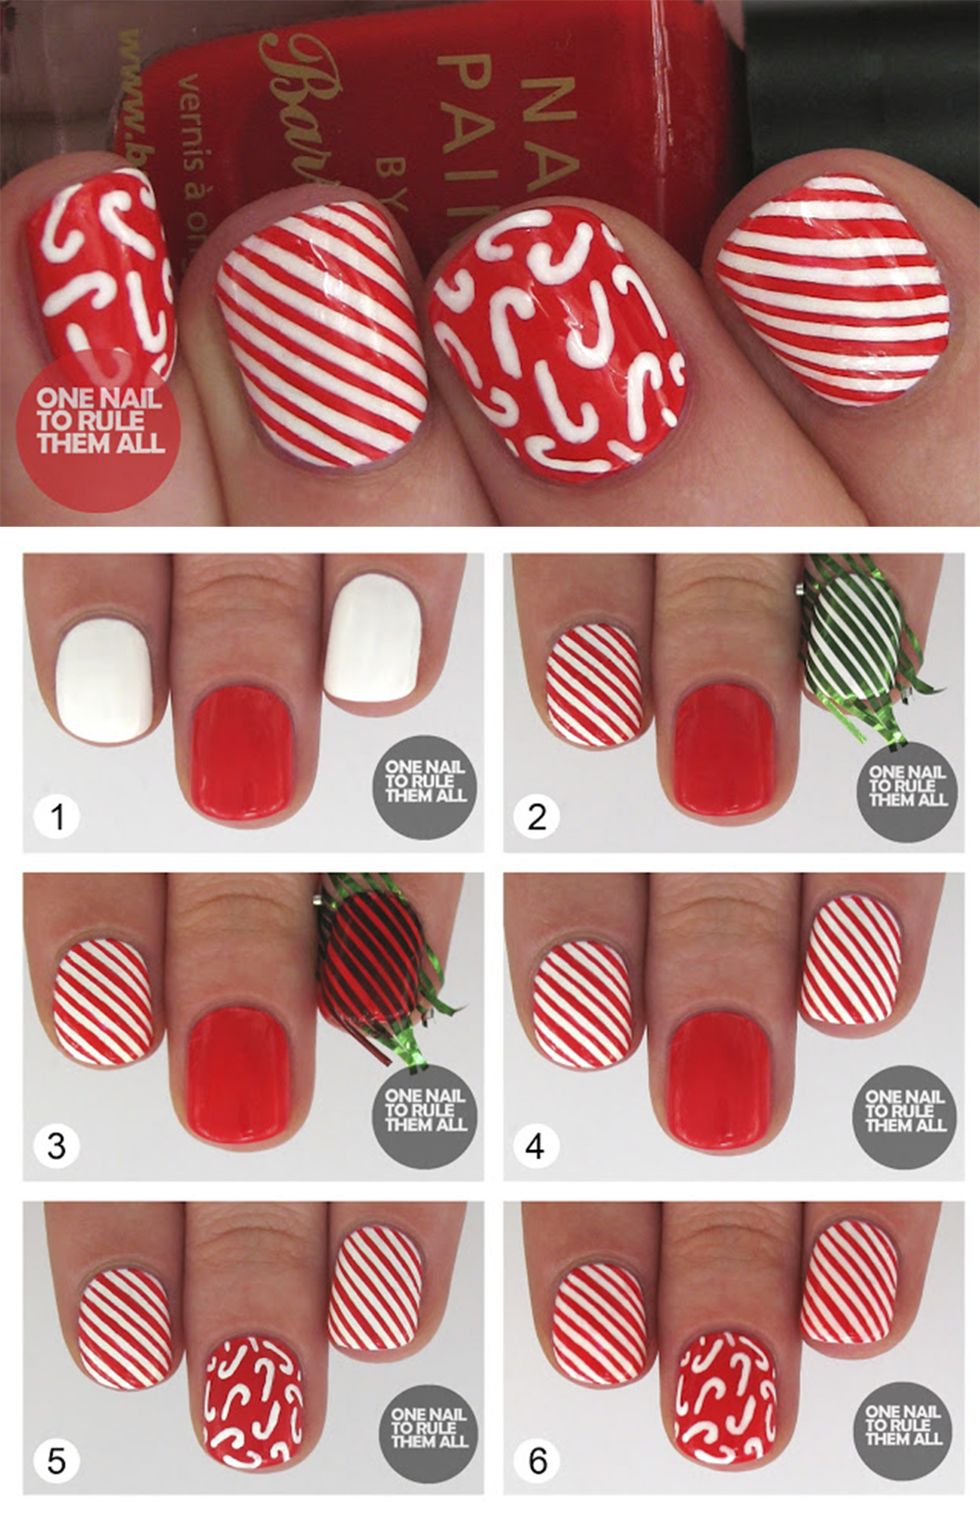 Holiday Nail Designs That Are Easy to Do at Home